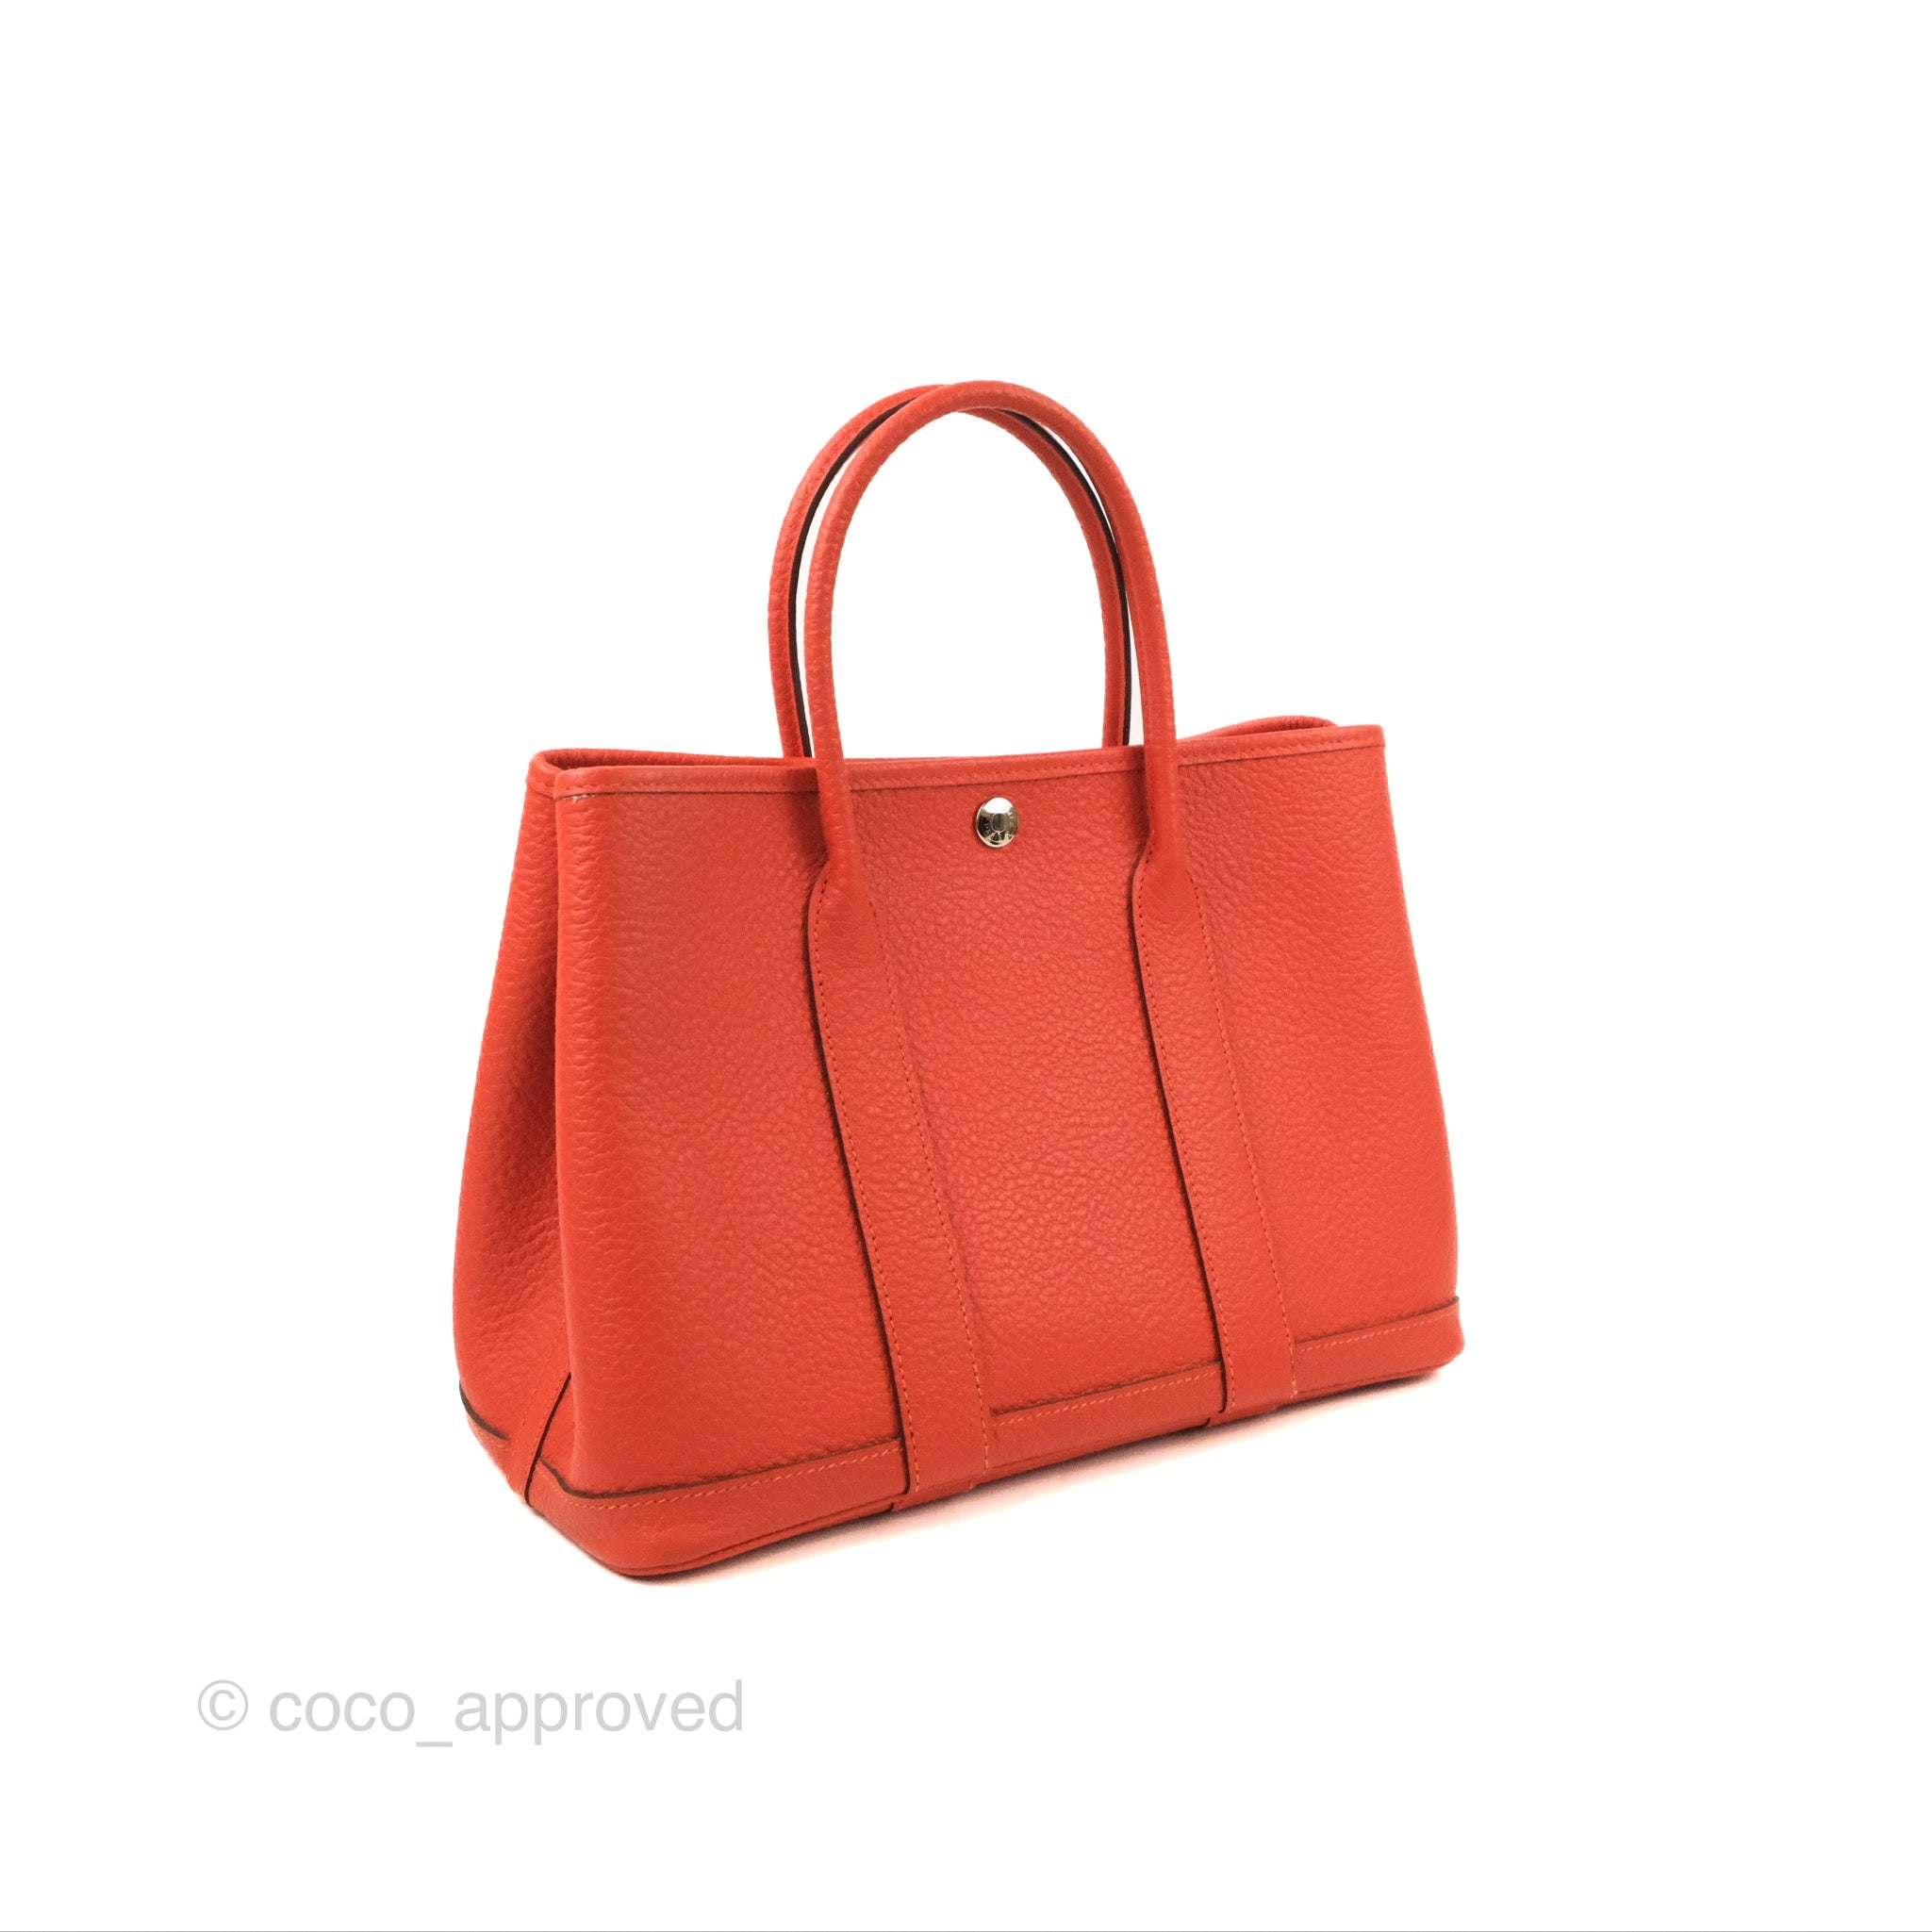 Hermes Garden Party Tote Leather 30 Orange